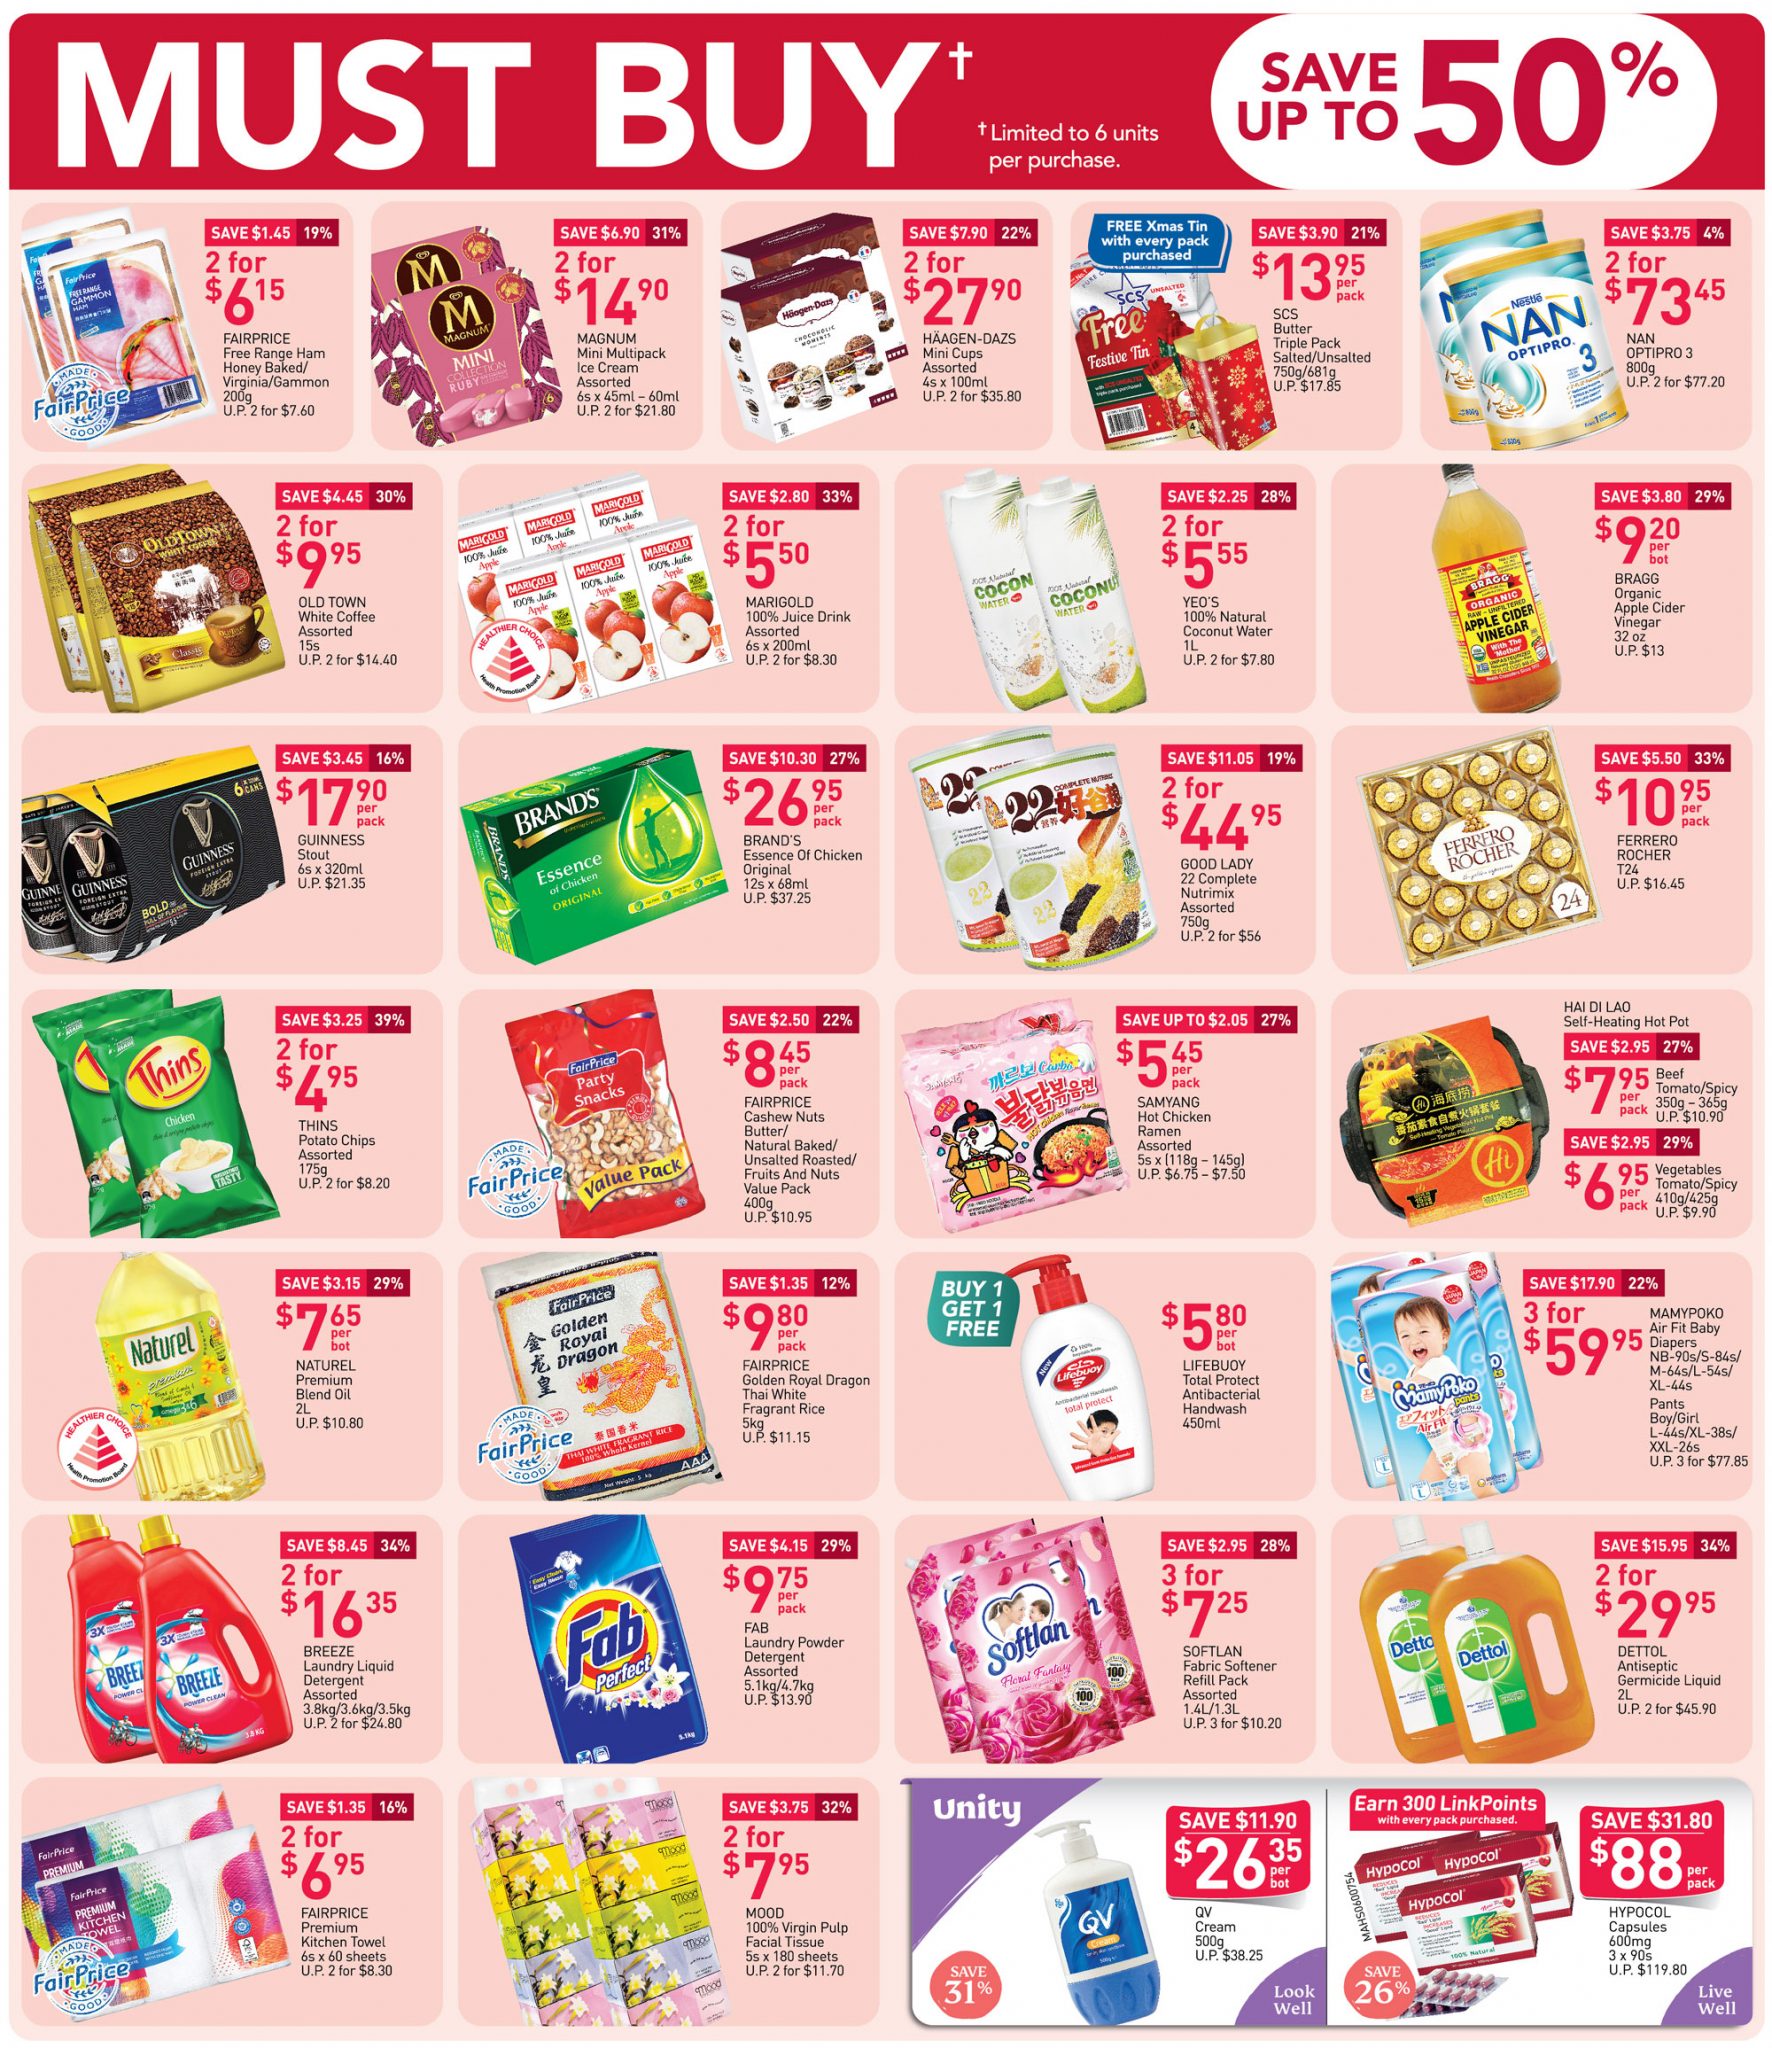 FairPrice must-buy items from now till 11 November 2020